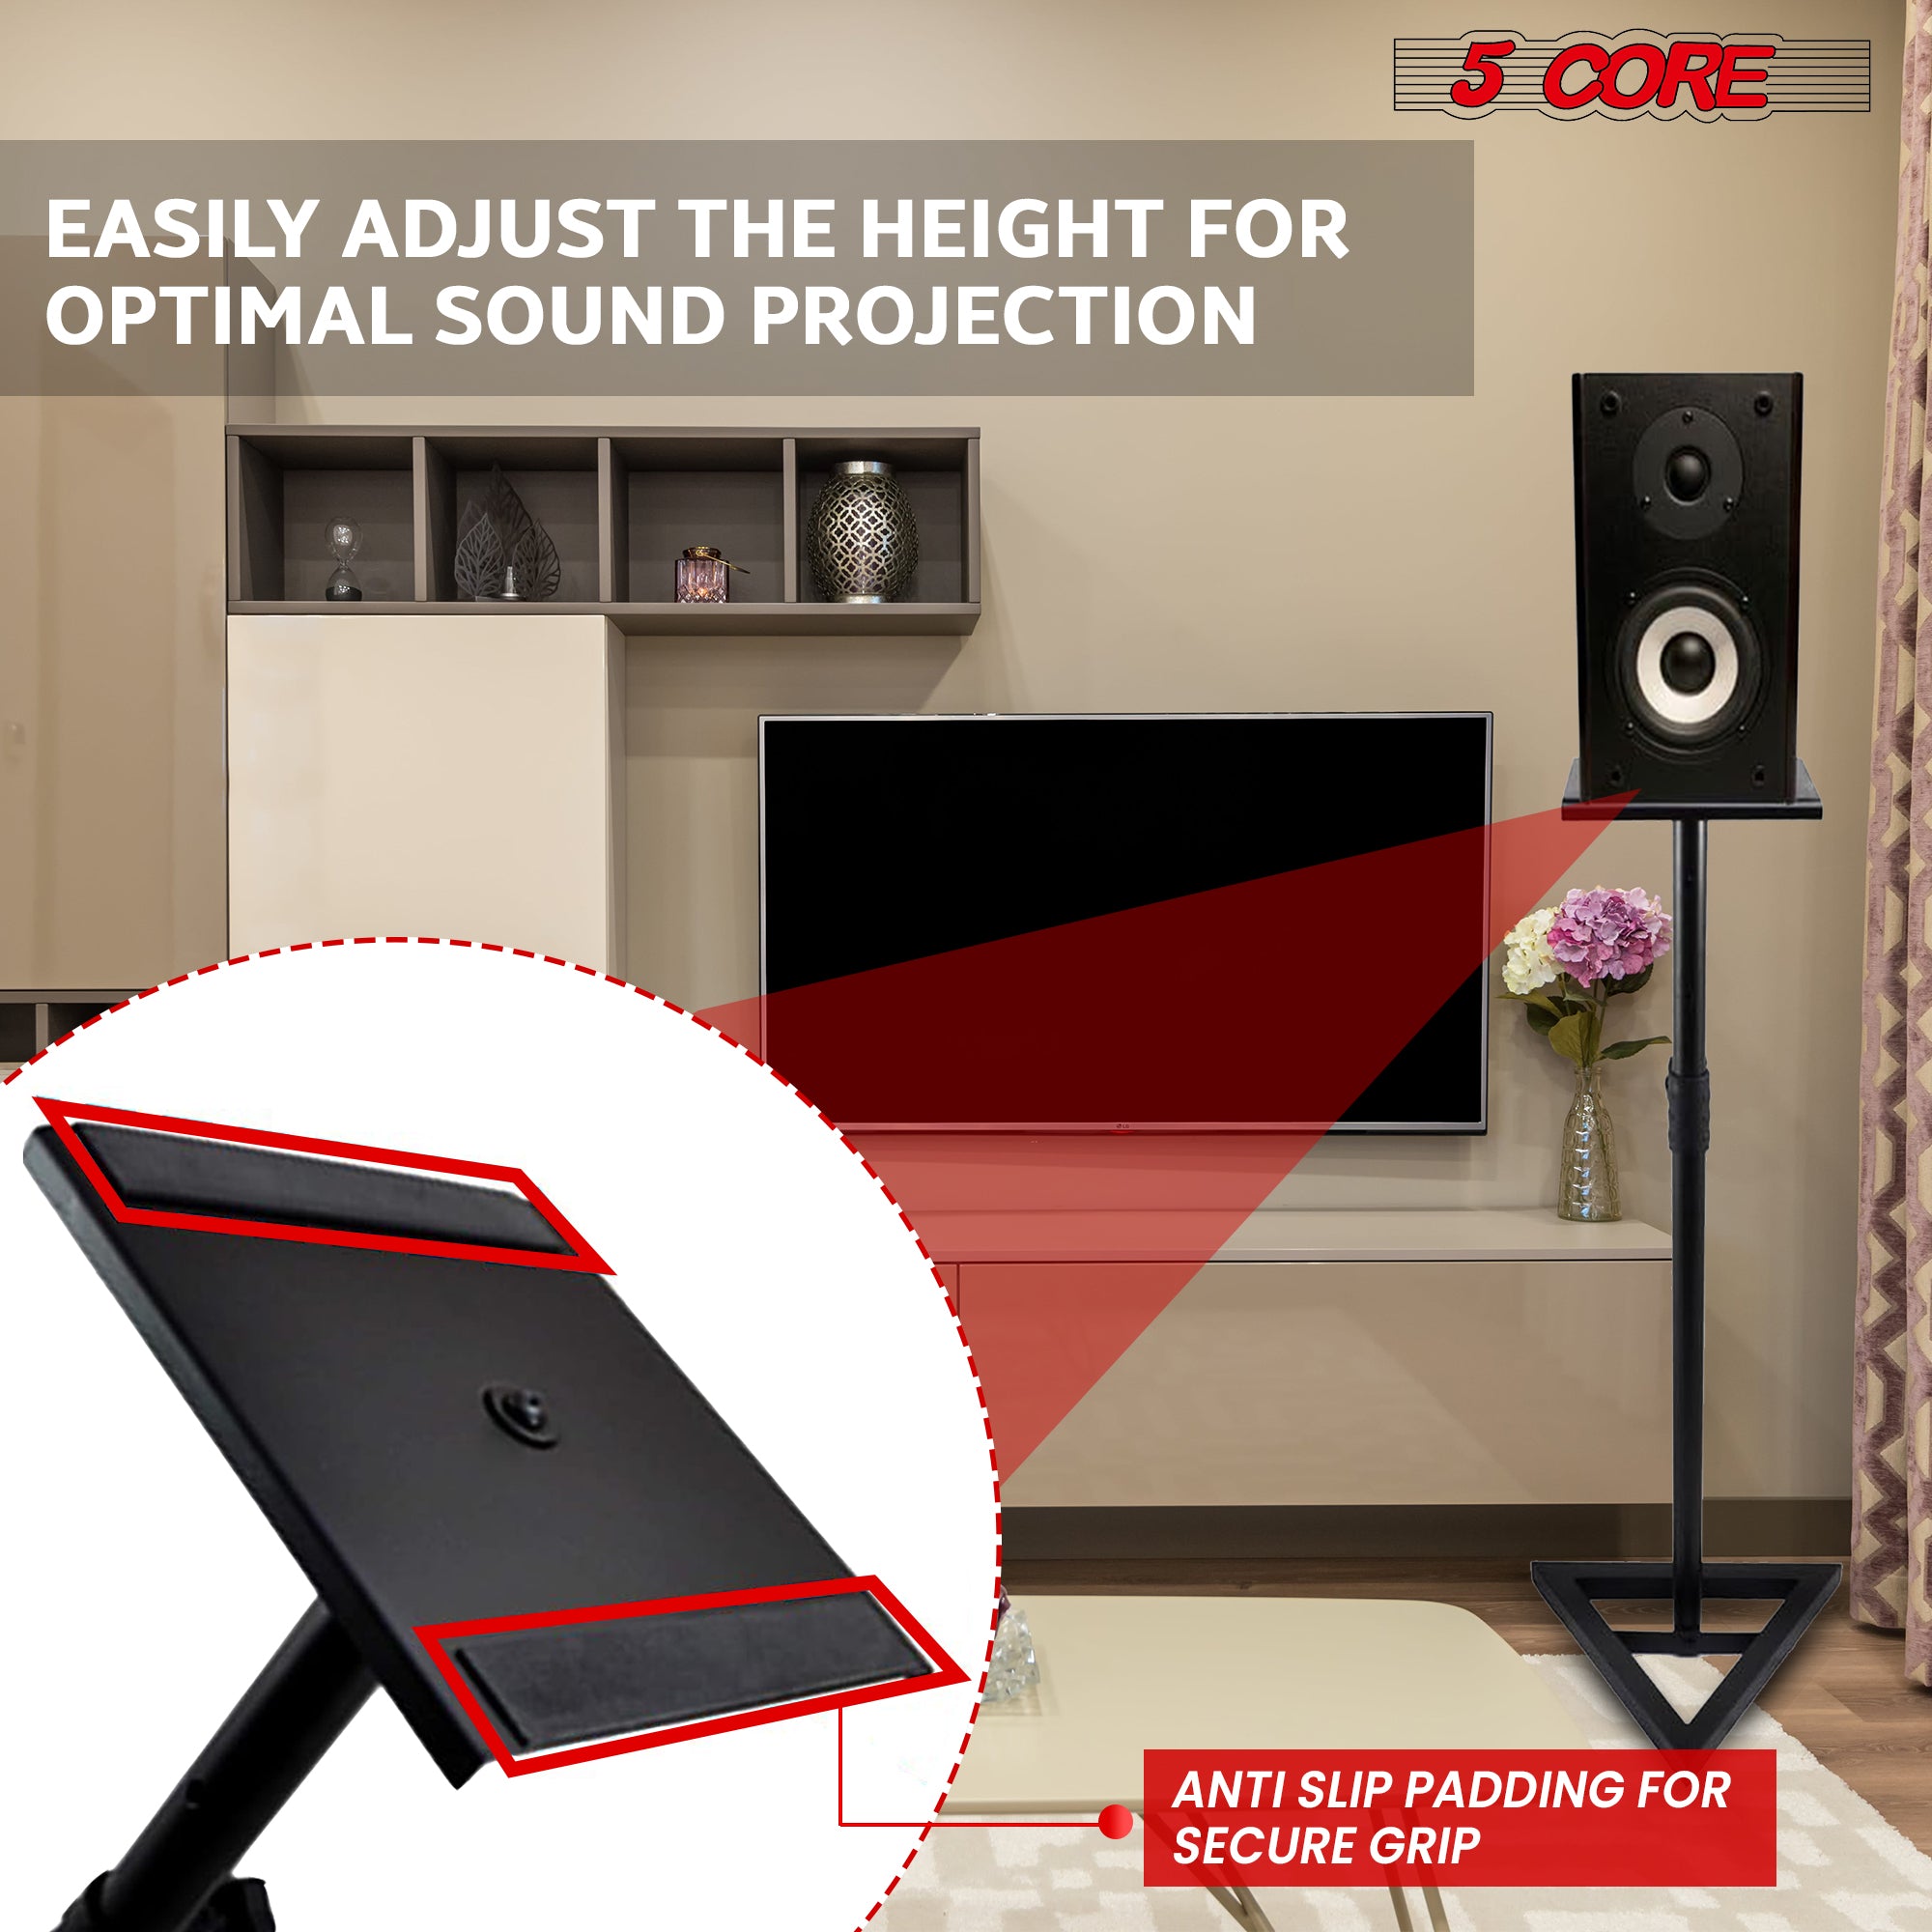 easily adjust the height for optimal sound projection